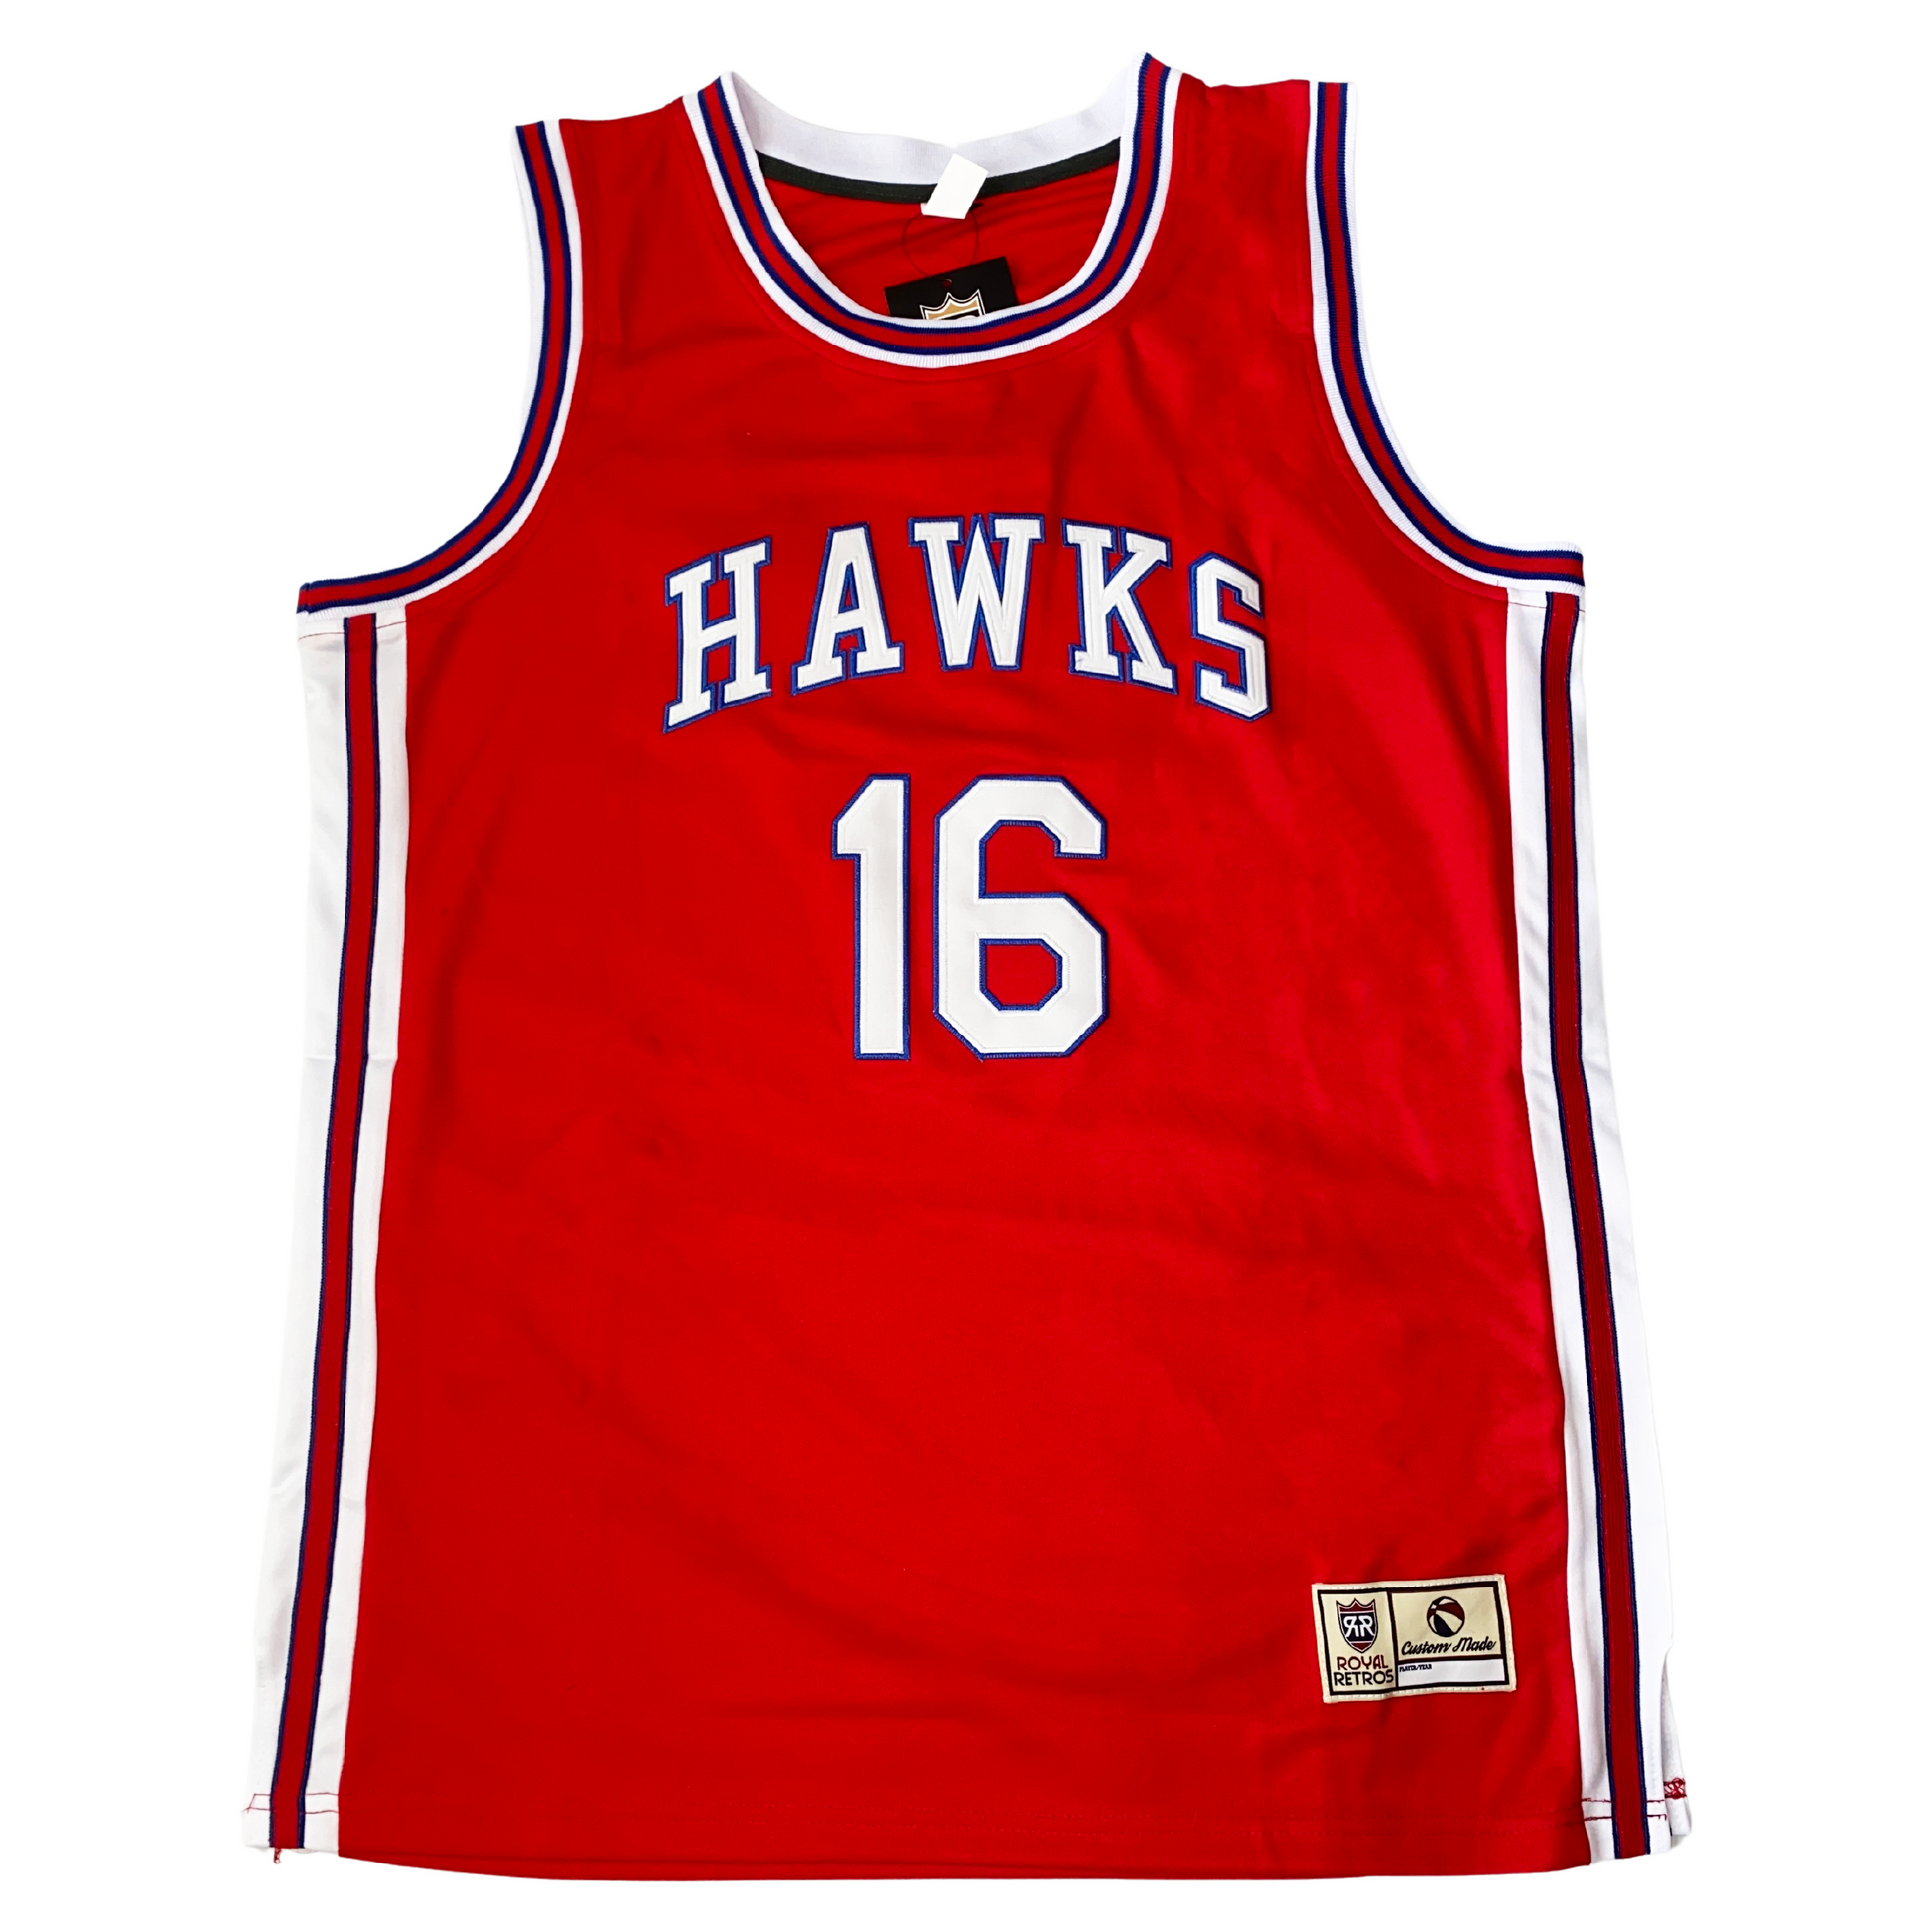 Big 5XL Jerseys - NBA / USA - In STOCK - VERY LIMITED THESE WILL